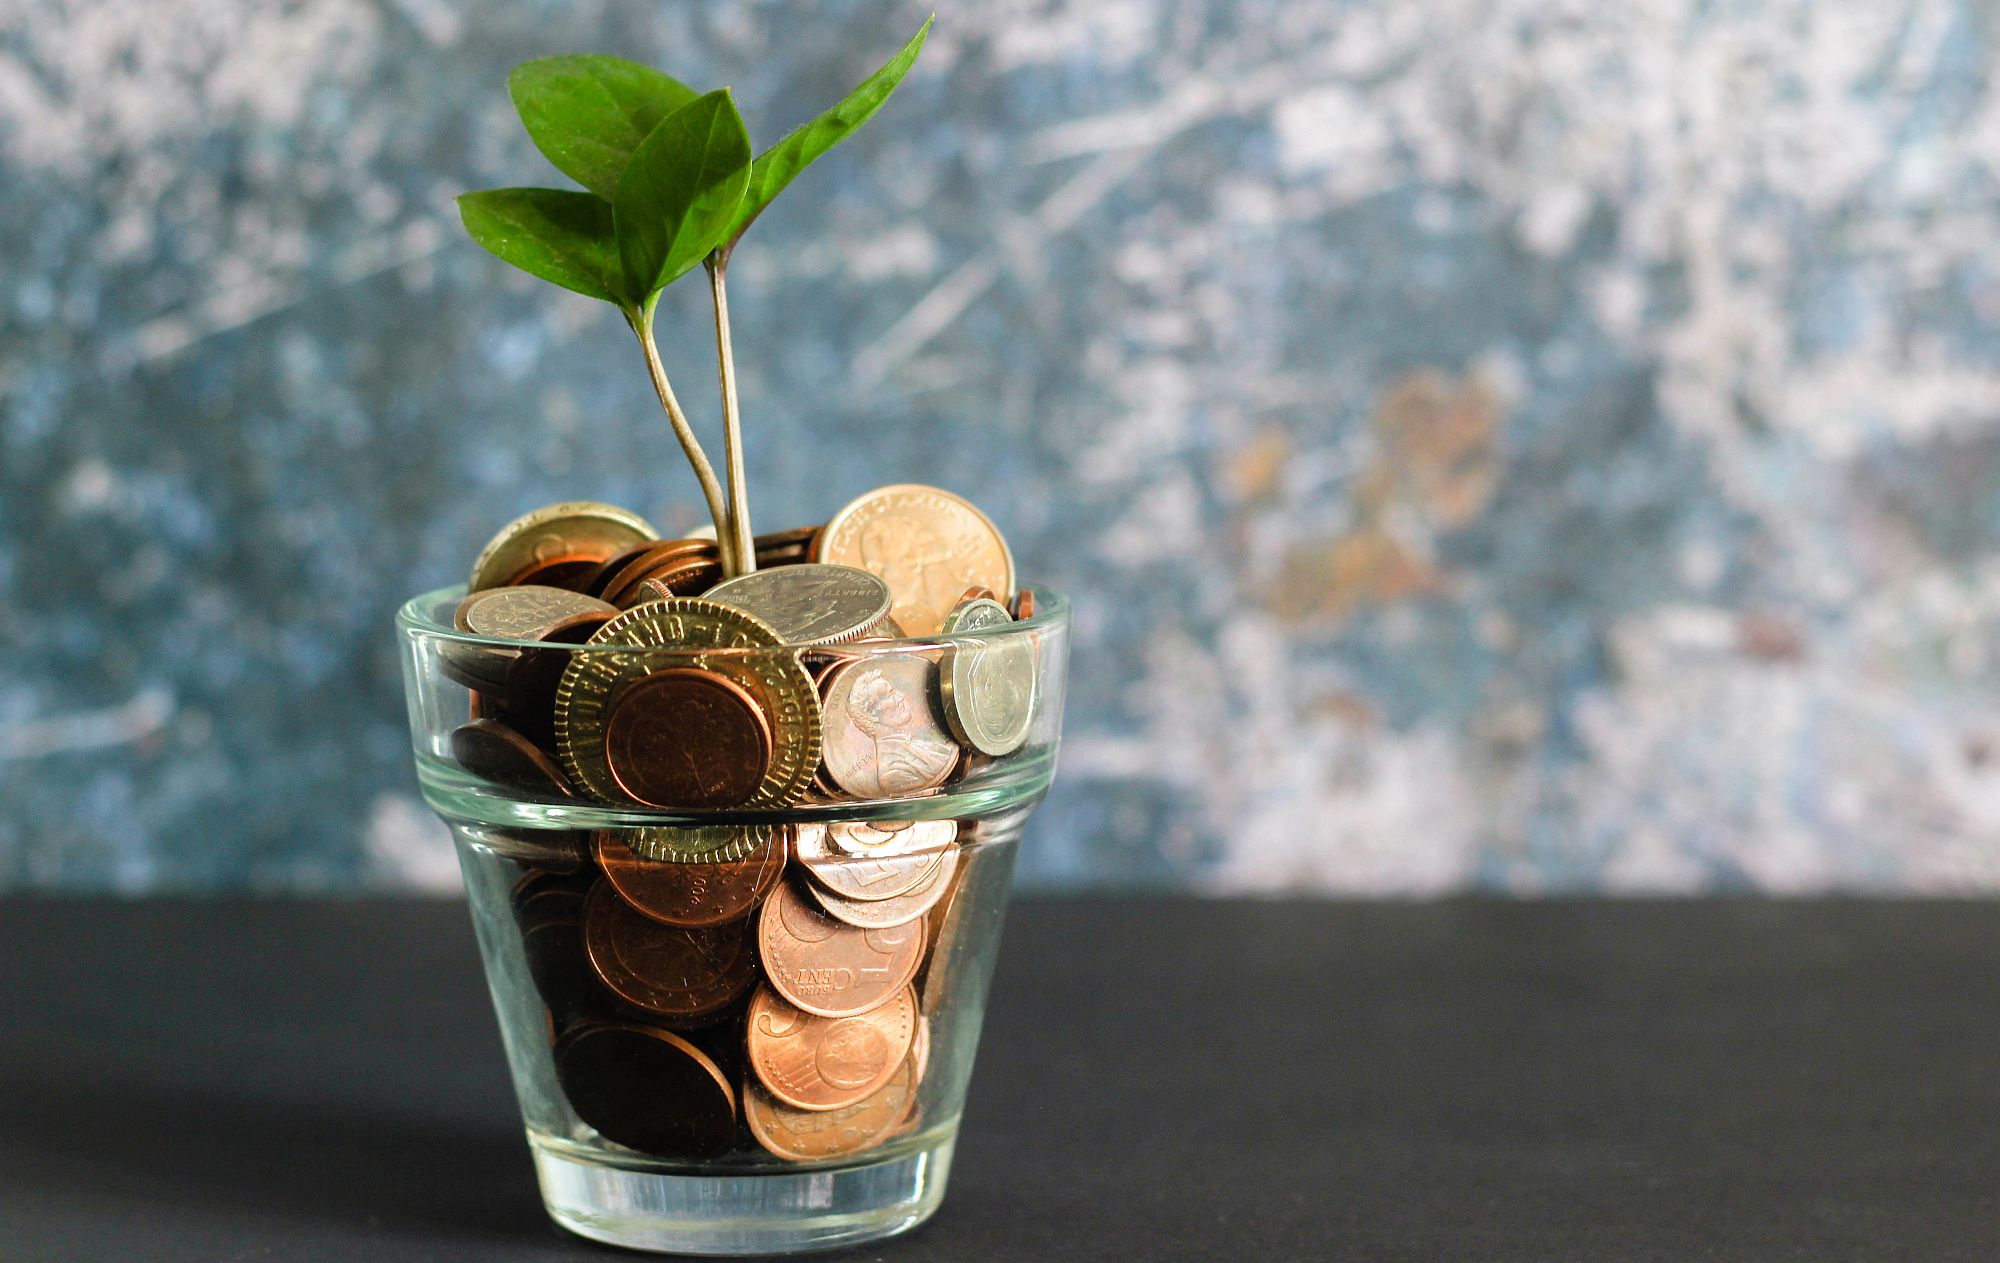 Image of a plant shoot growing from a pot of money